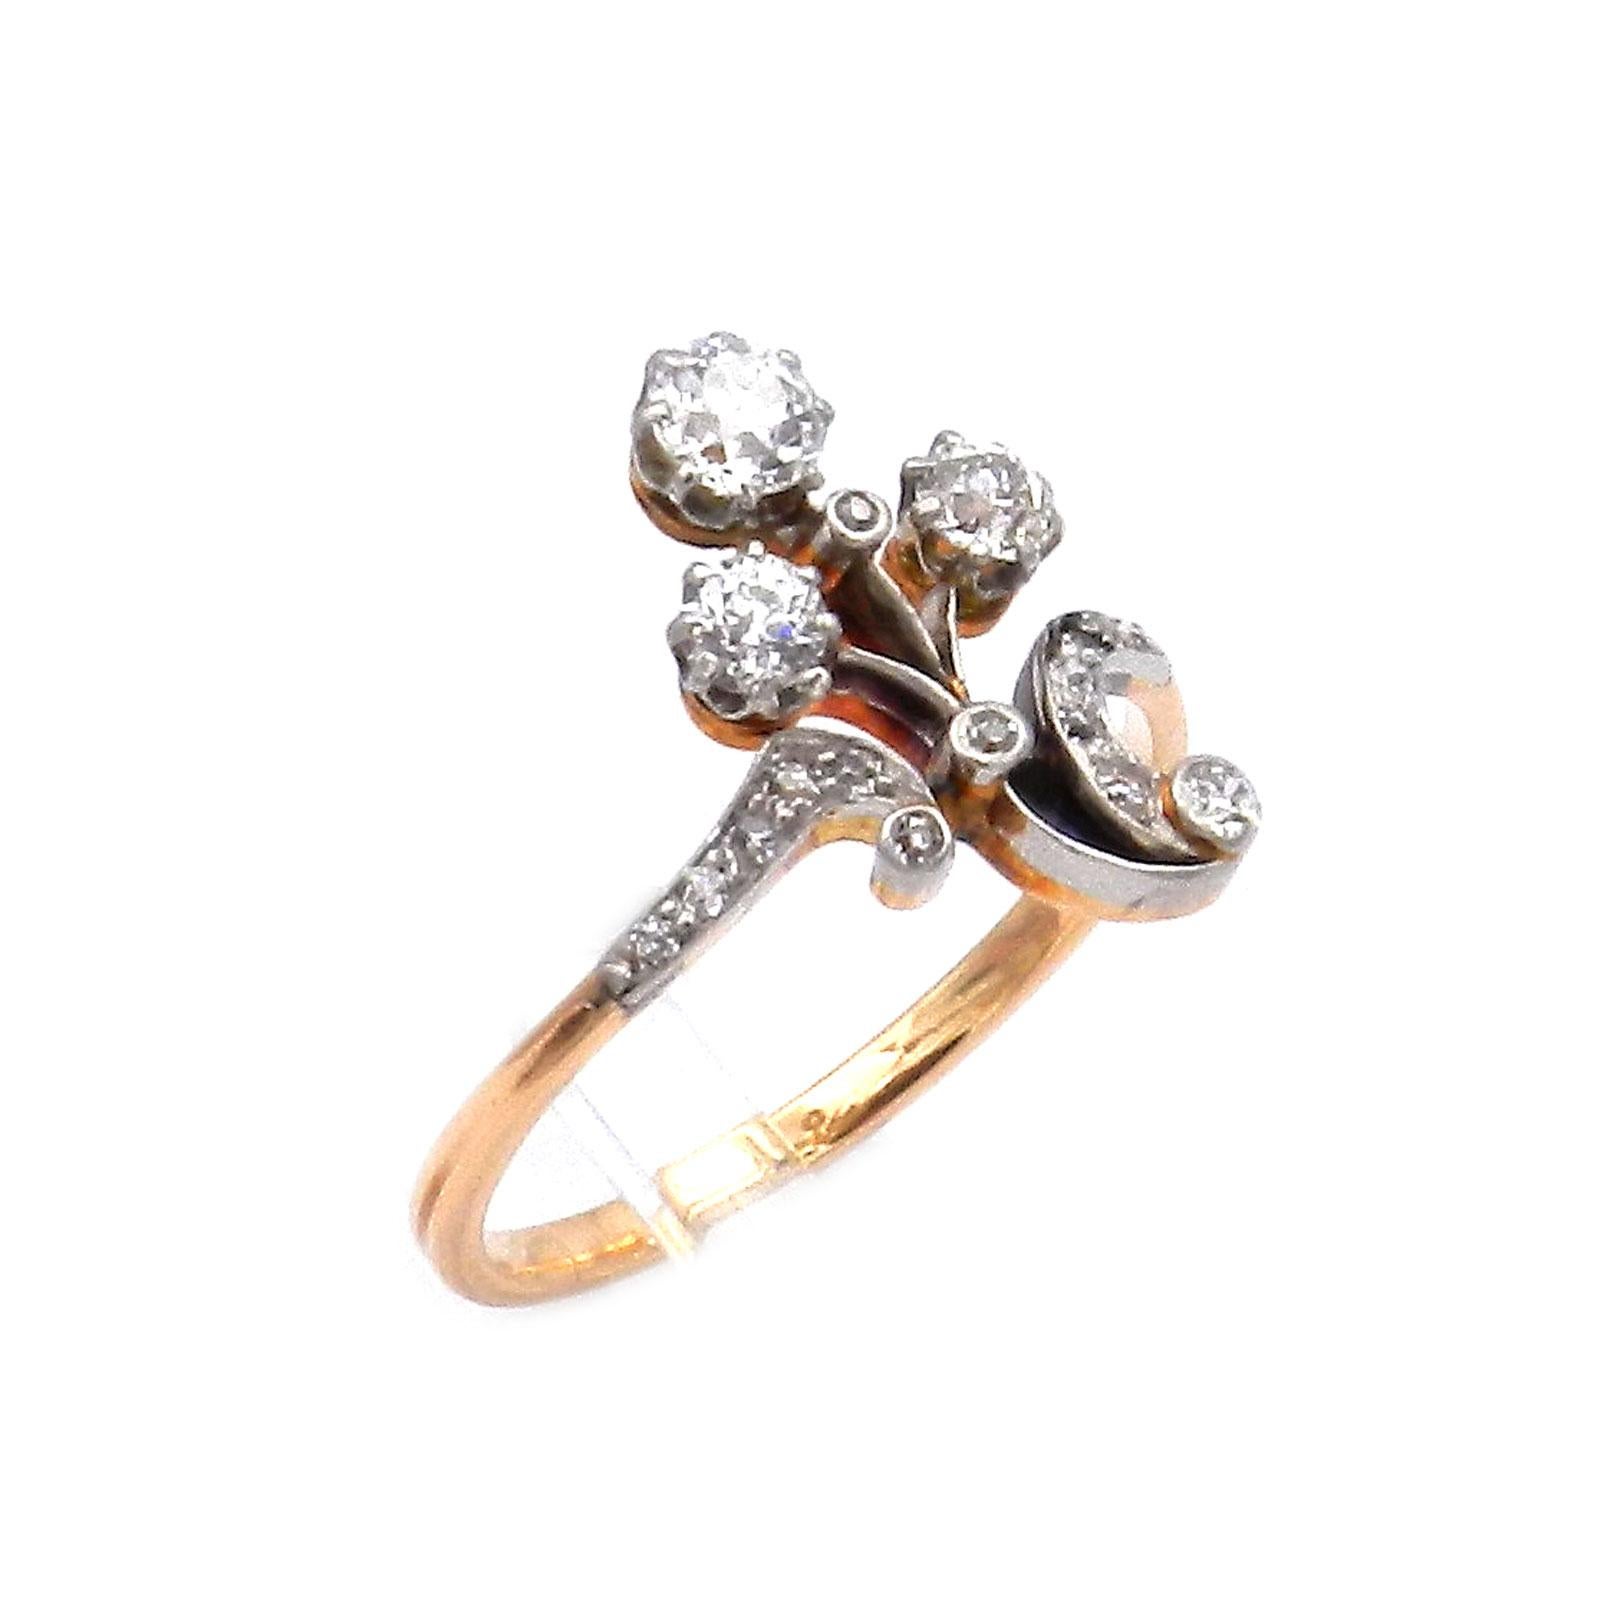 Art Nouveau 0.75 Carat Diamond Gold and Platinum Flower Ring circa 1910

Decorative Art Nouveau diamond ring as an elegantly intertwined flower, set with four diamonds totaling 0.7 ct, the curved leaves set with ten additional small diamonds. As was